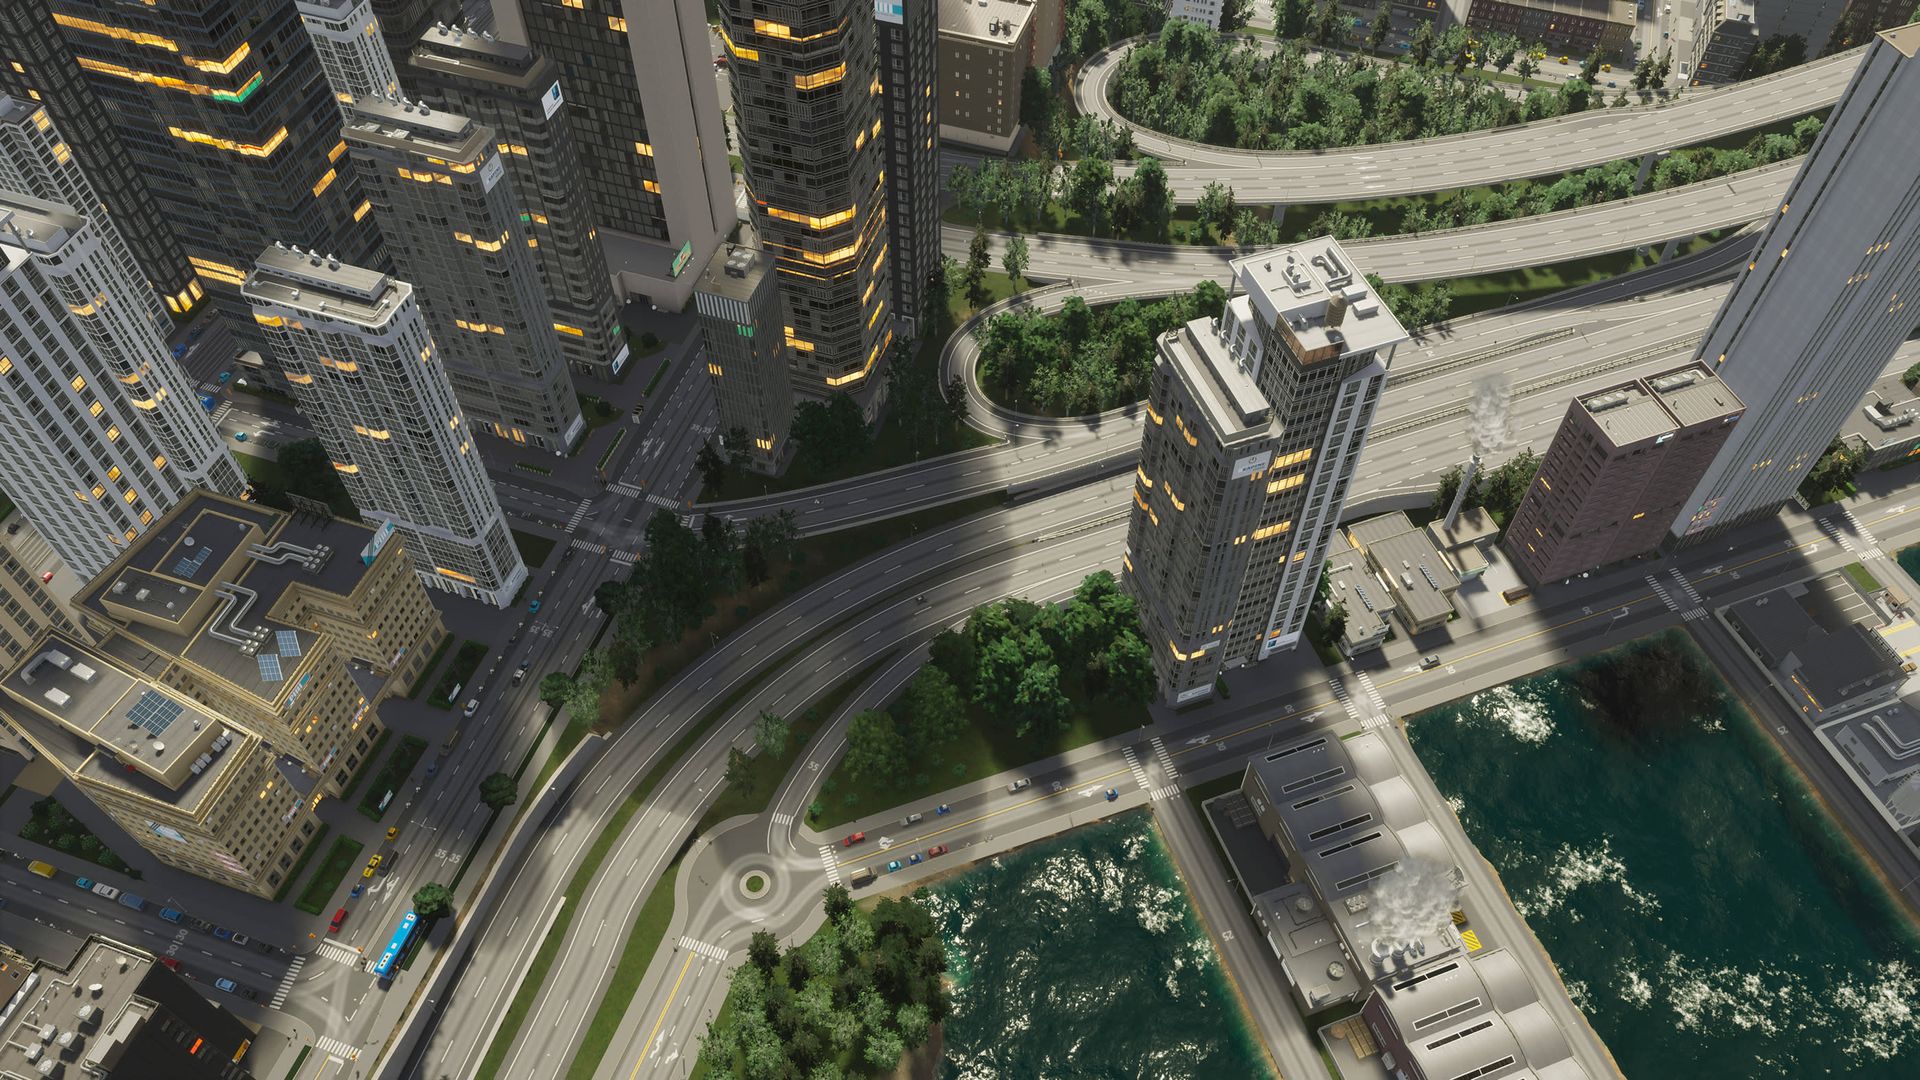 Best Cities Skylines 2 settings for video and gameplay